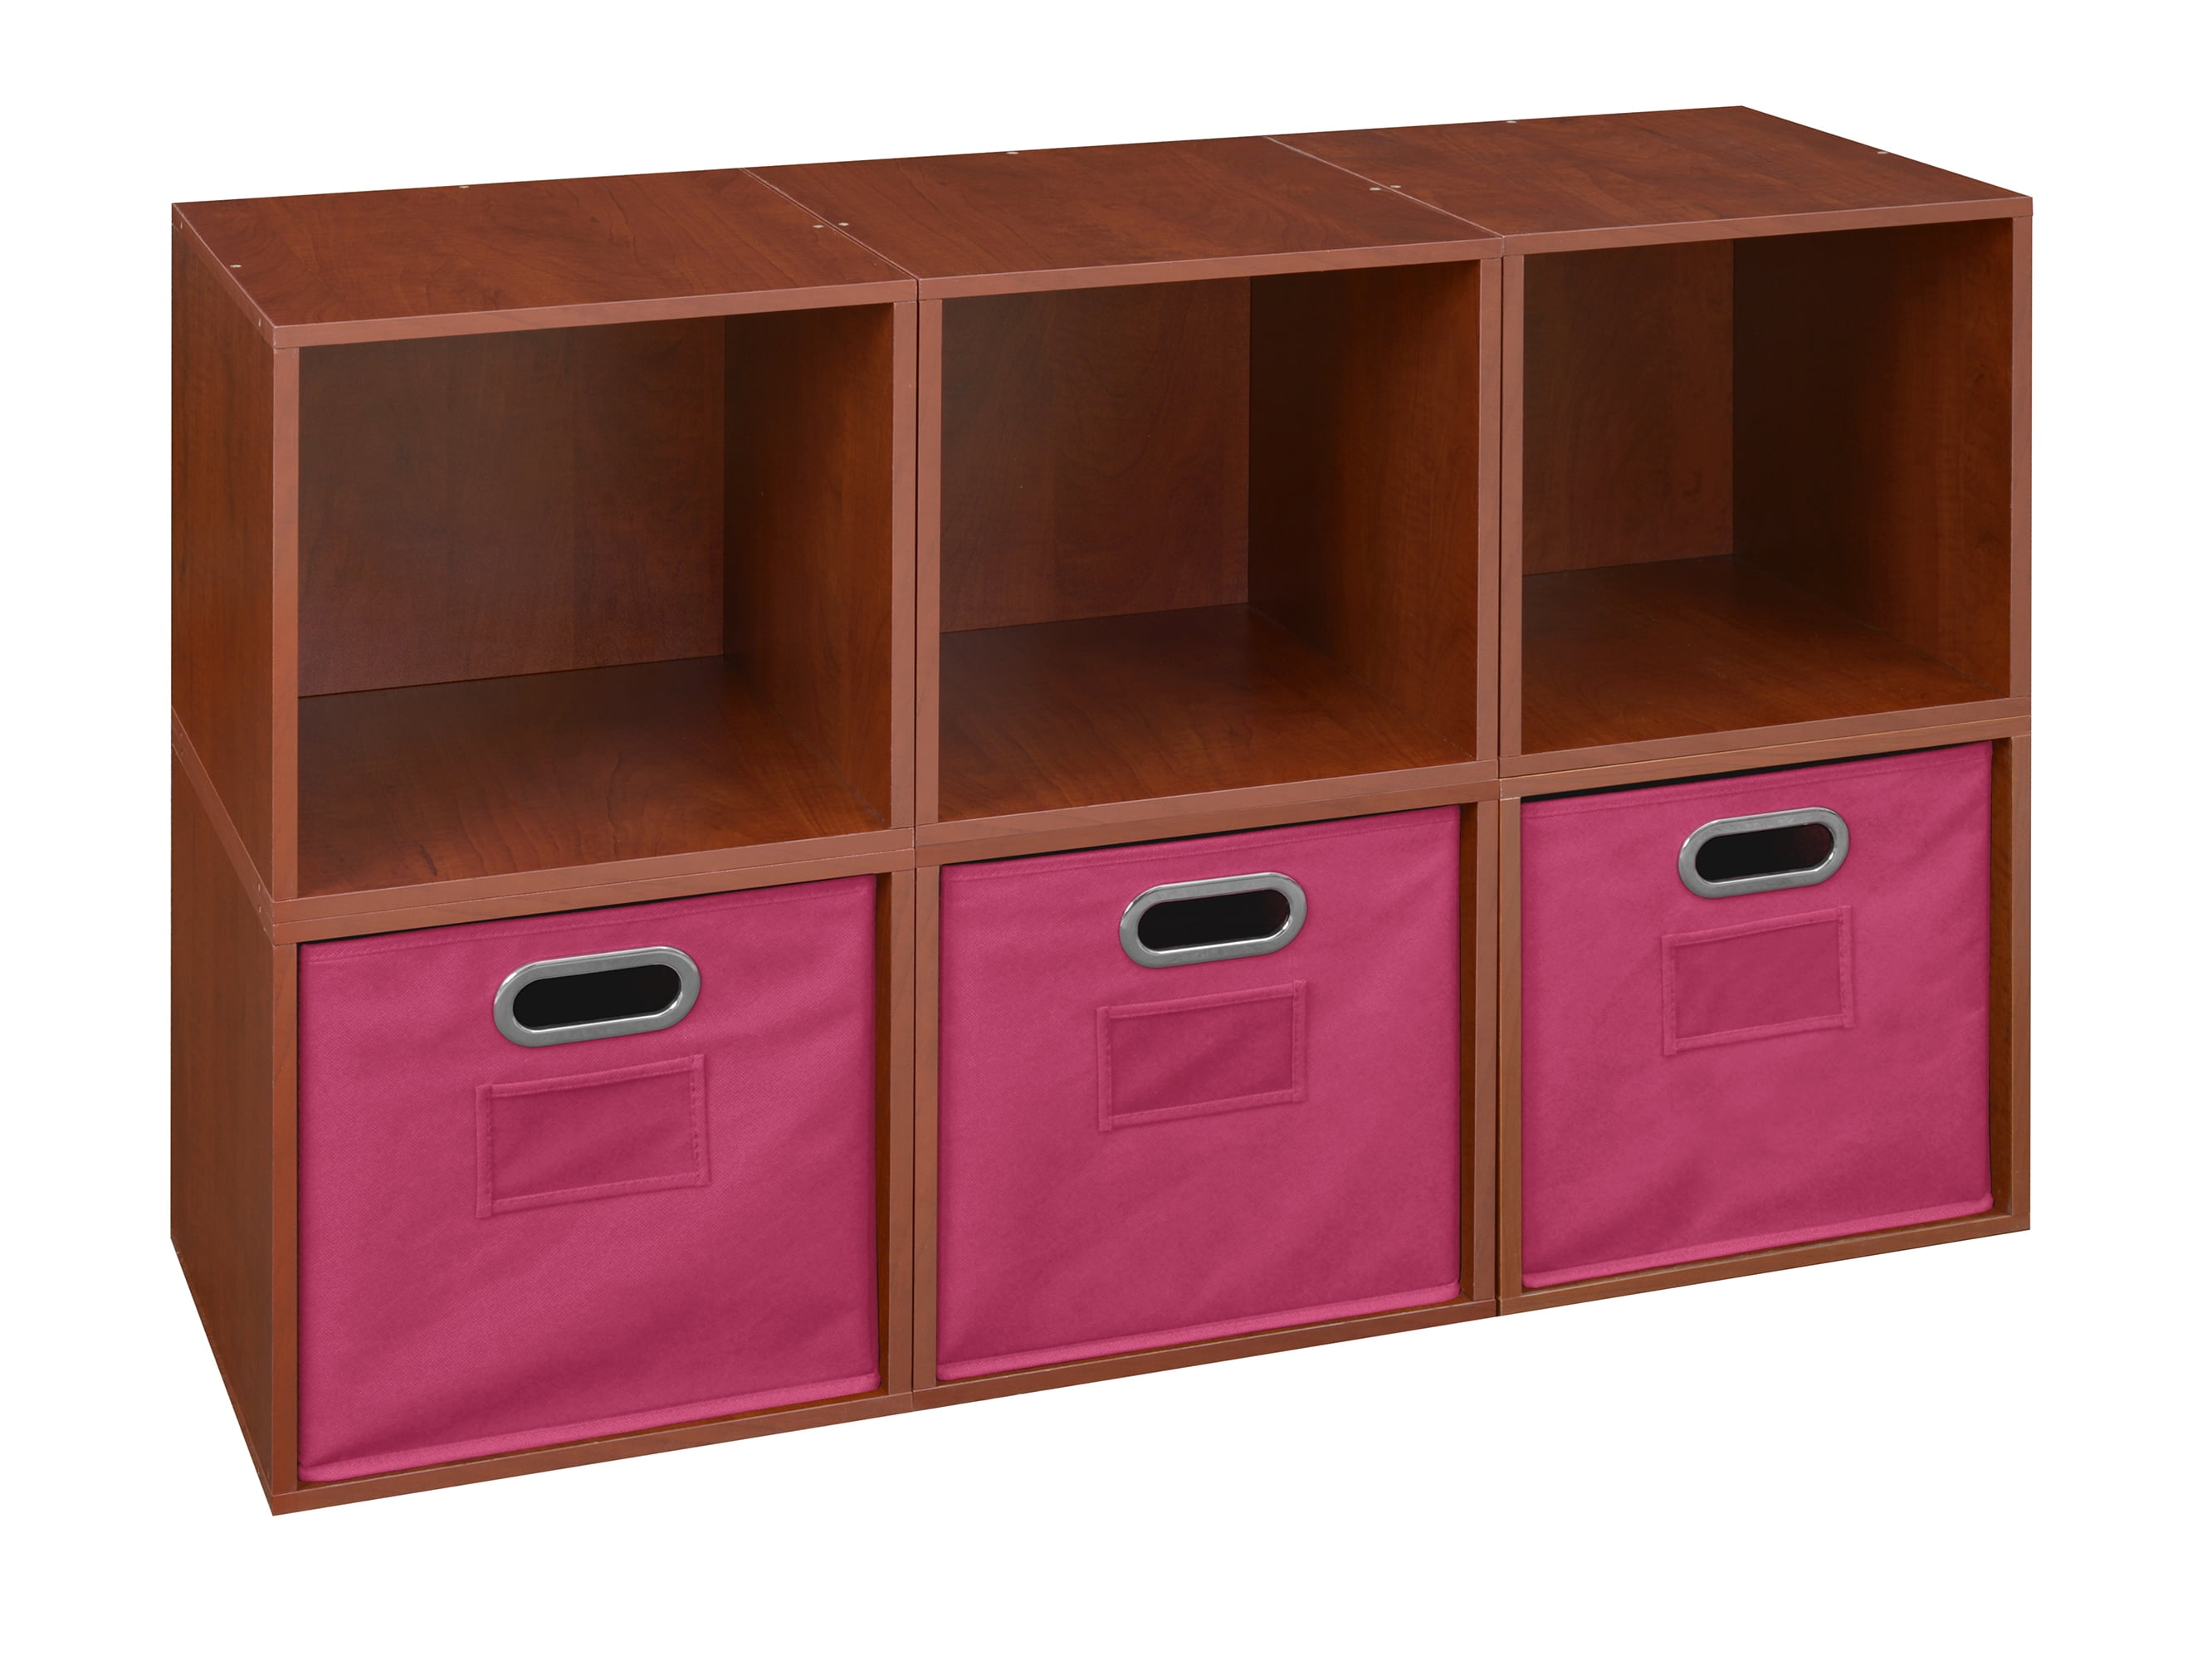 Niche Cubo Storage Set of 6 Cubes, Cherry and 3 Canvas Bins- Pink ...